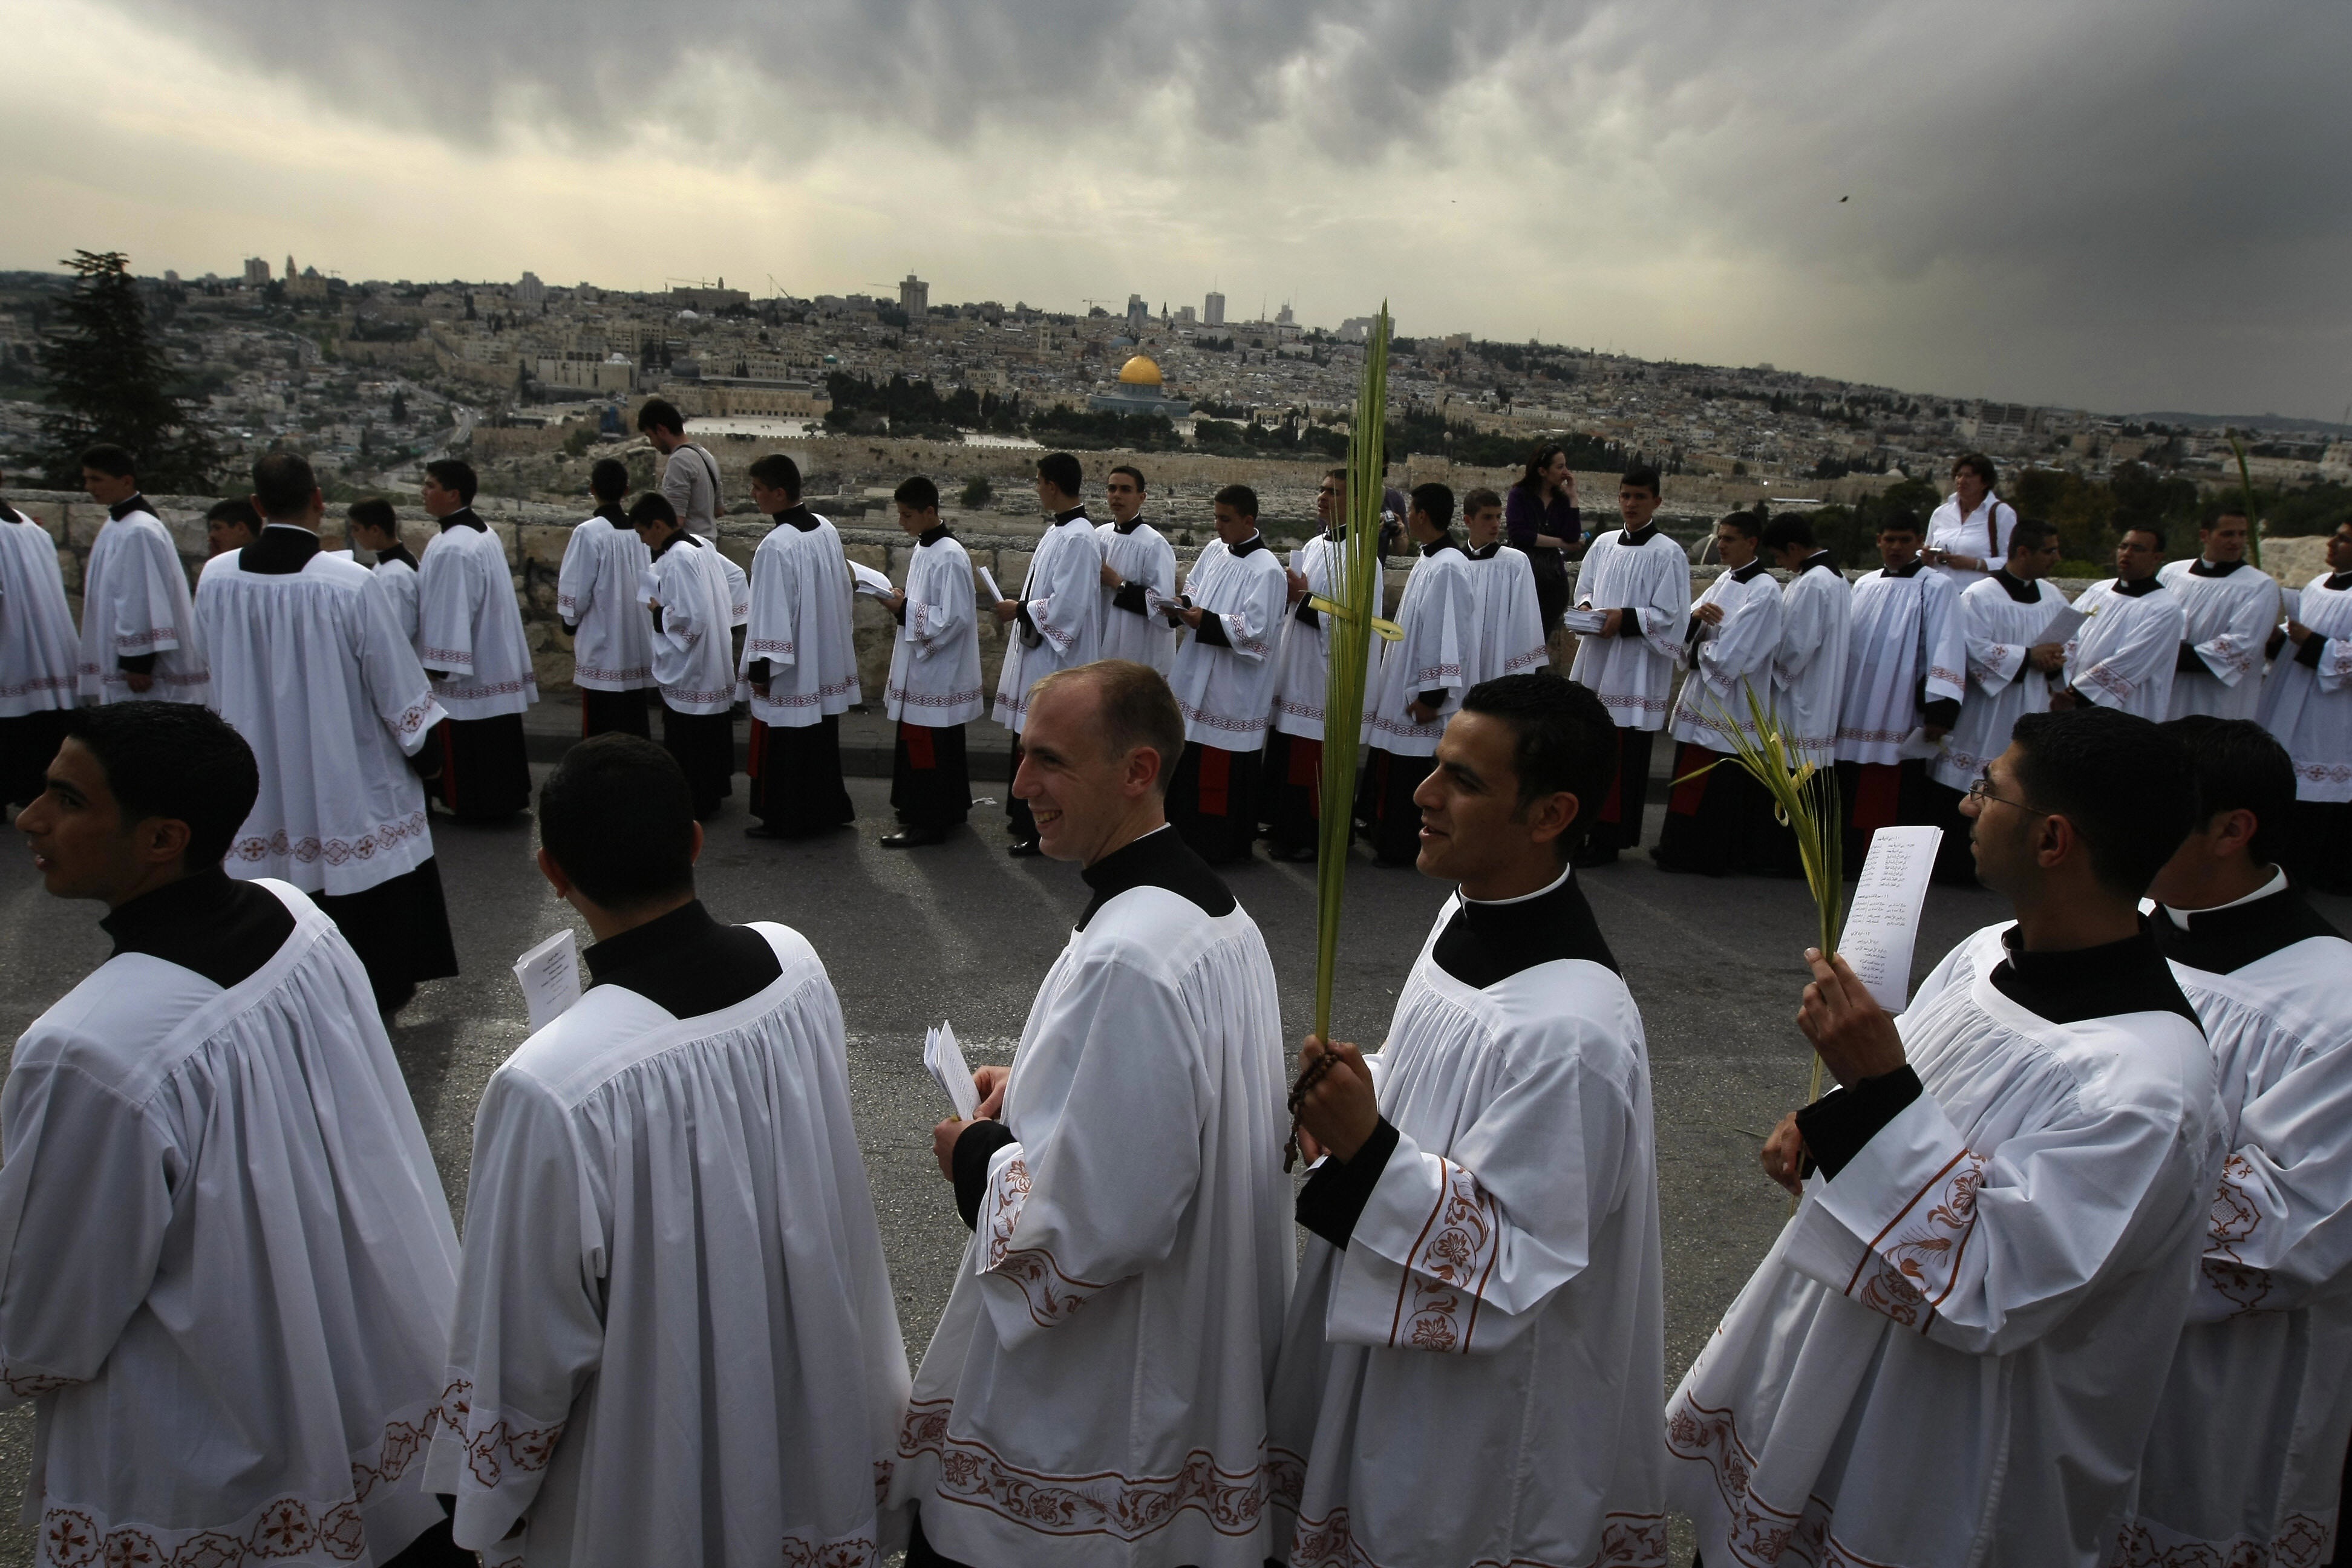 MENAHEM KAHANA/AFP/Getty Images. Catholic clergymen take part in the traditional Palm Sunday procession from Mt. Olives to Jerusalem's old city on April 5, 2009.